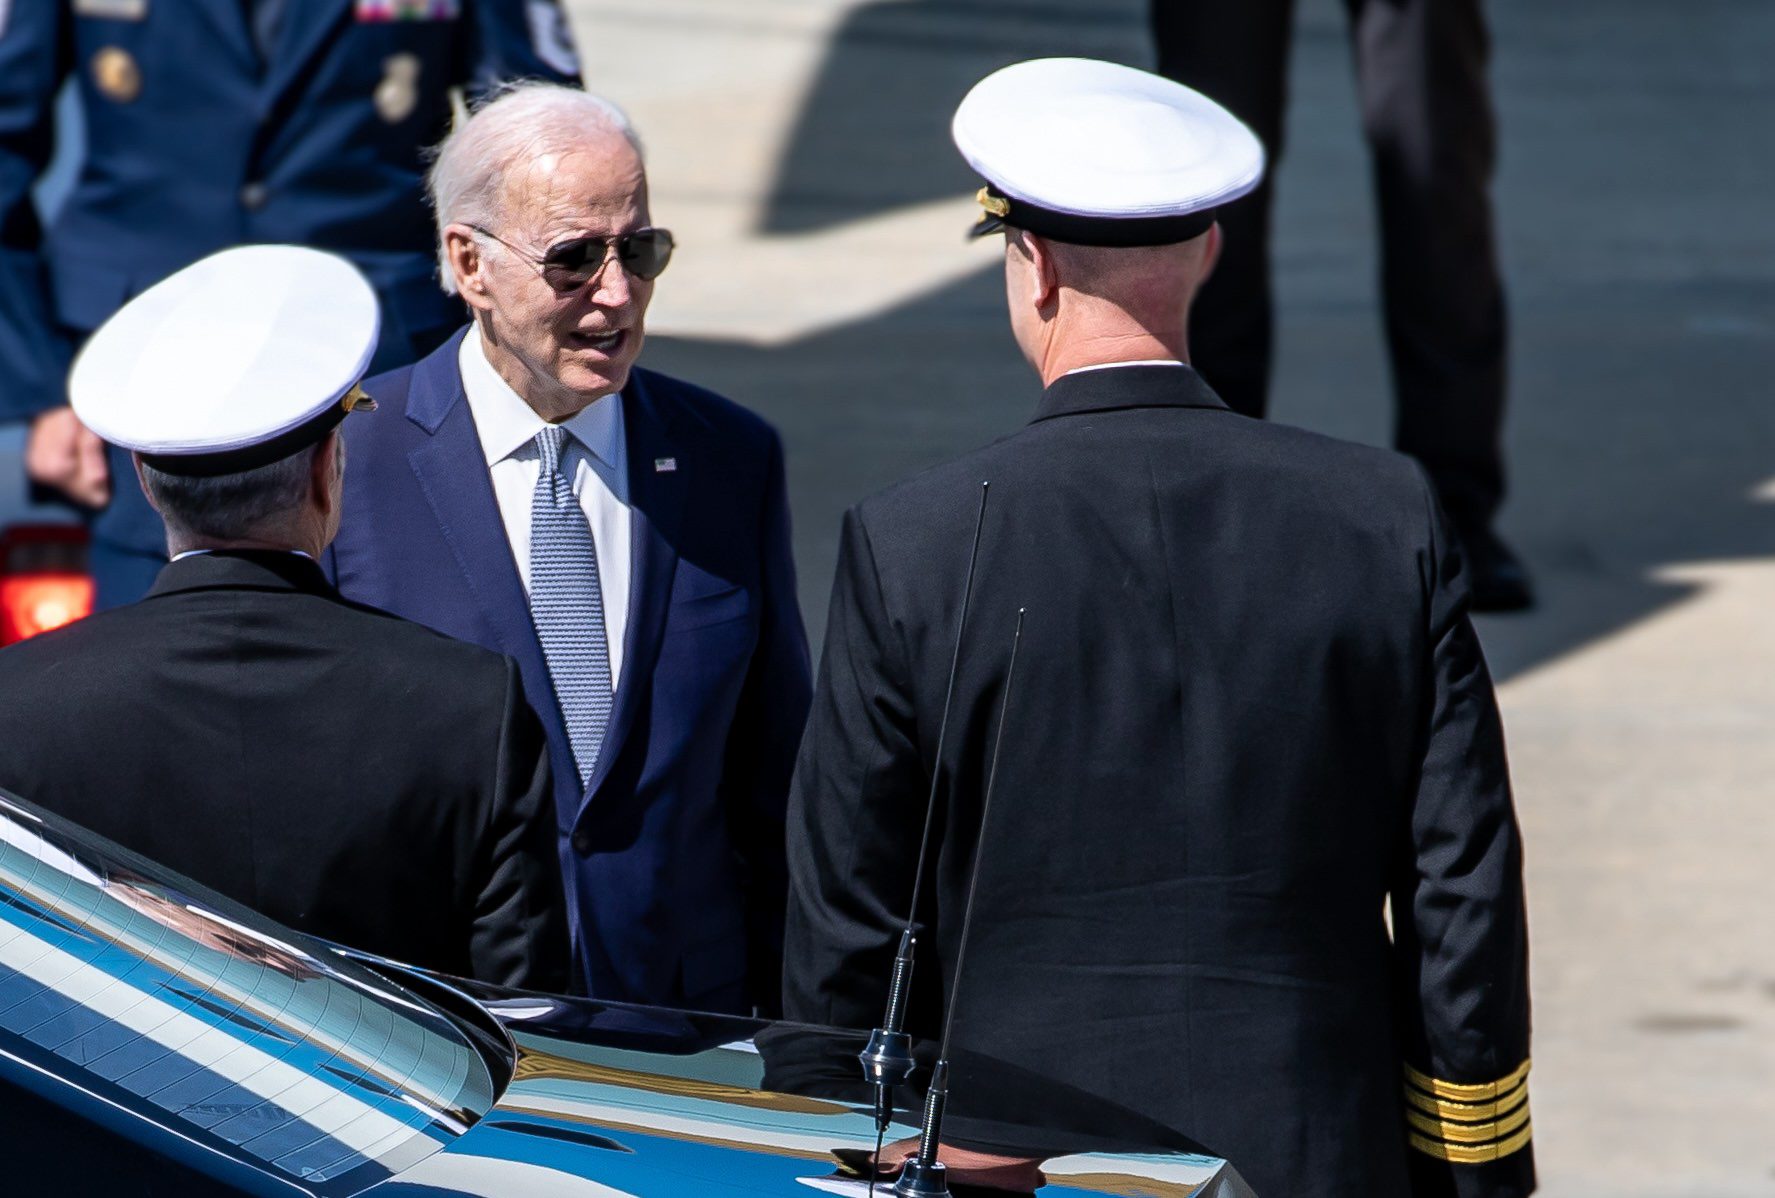 President Biden talks with US Naval officers after departing Air Force 1